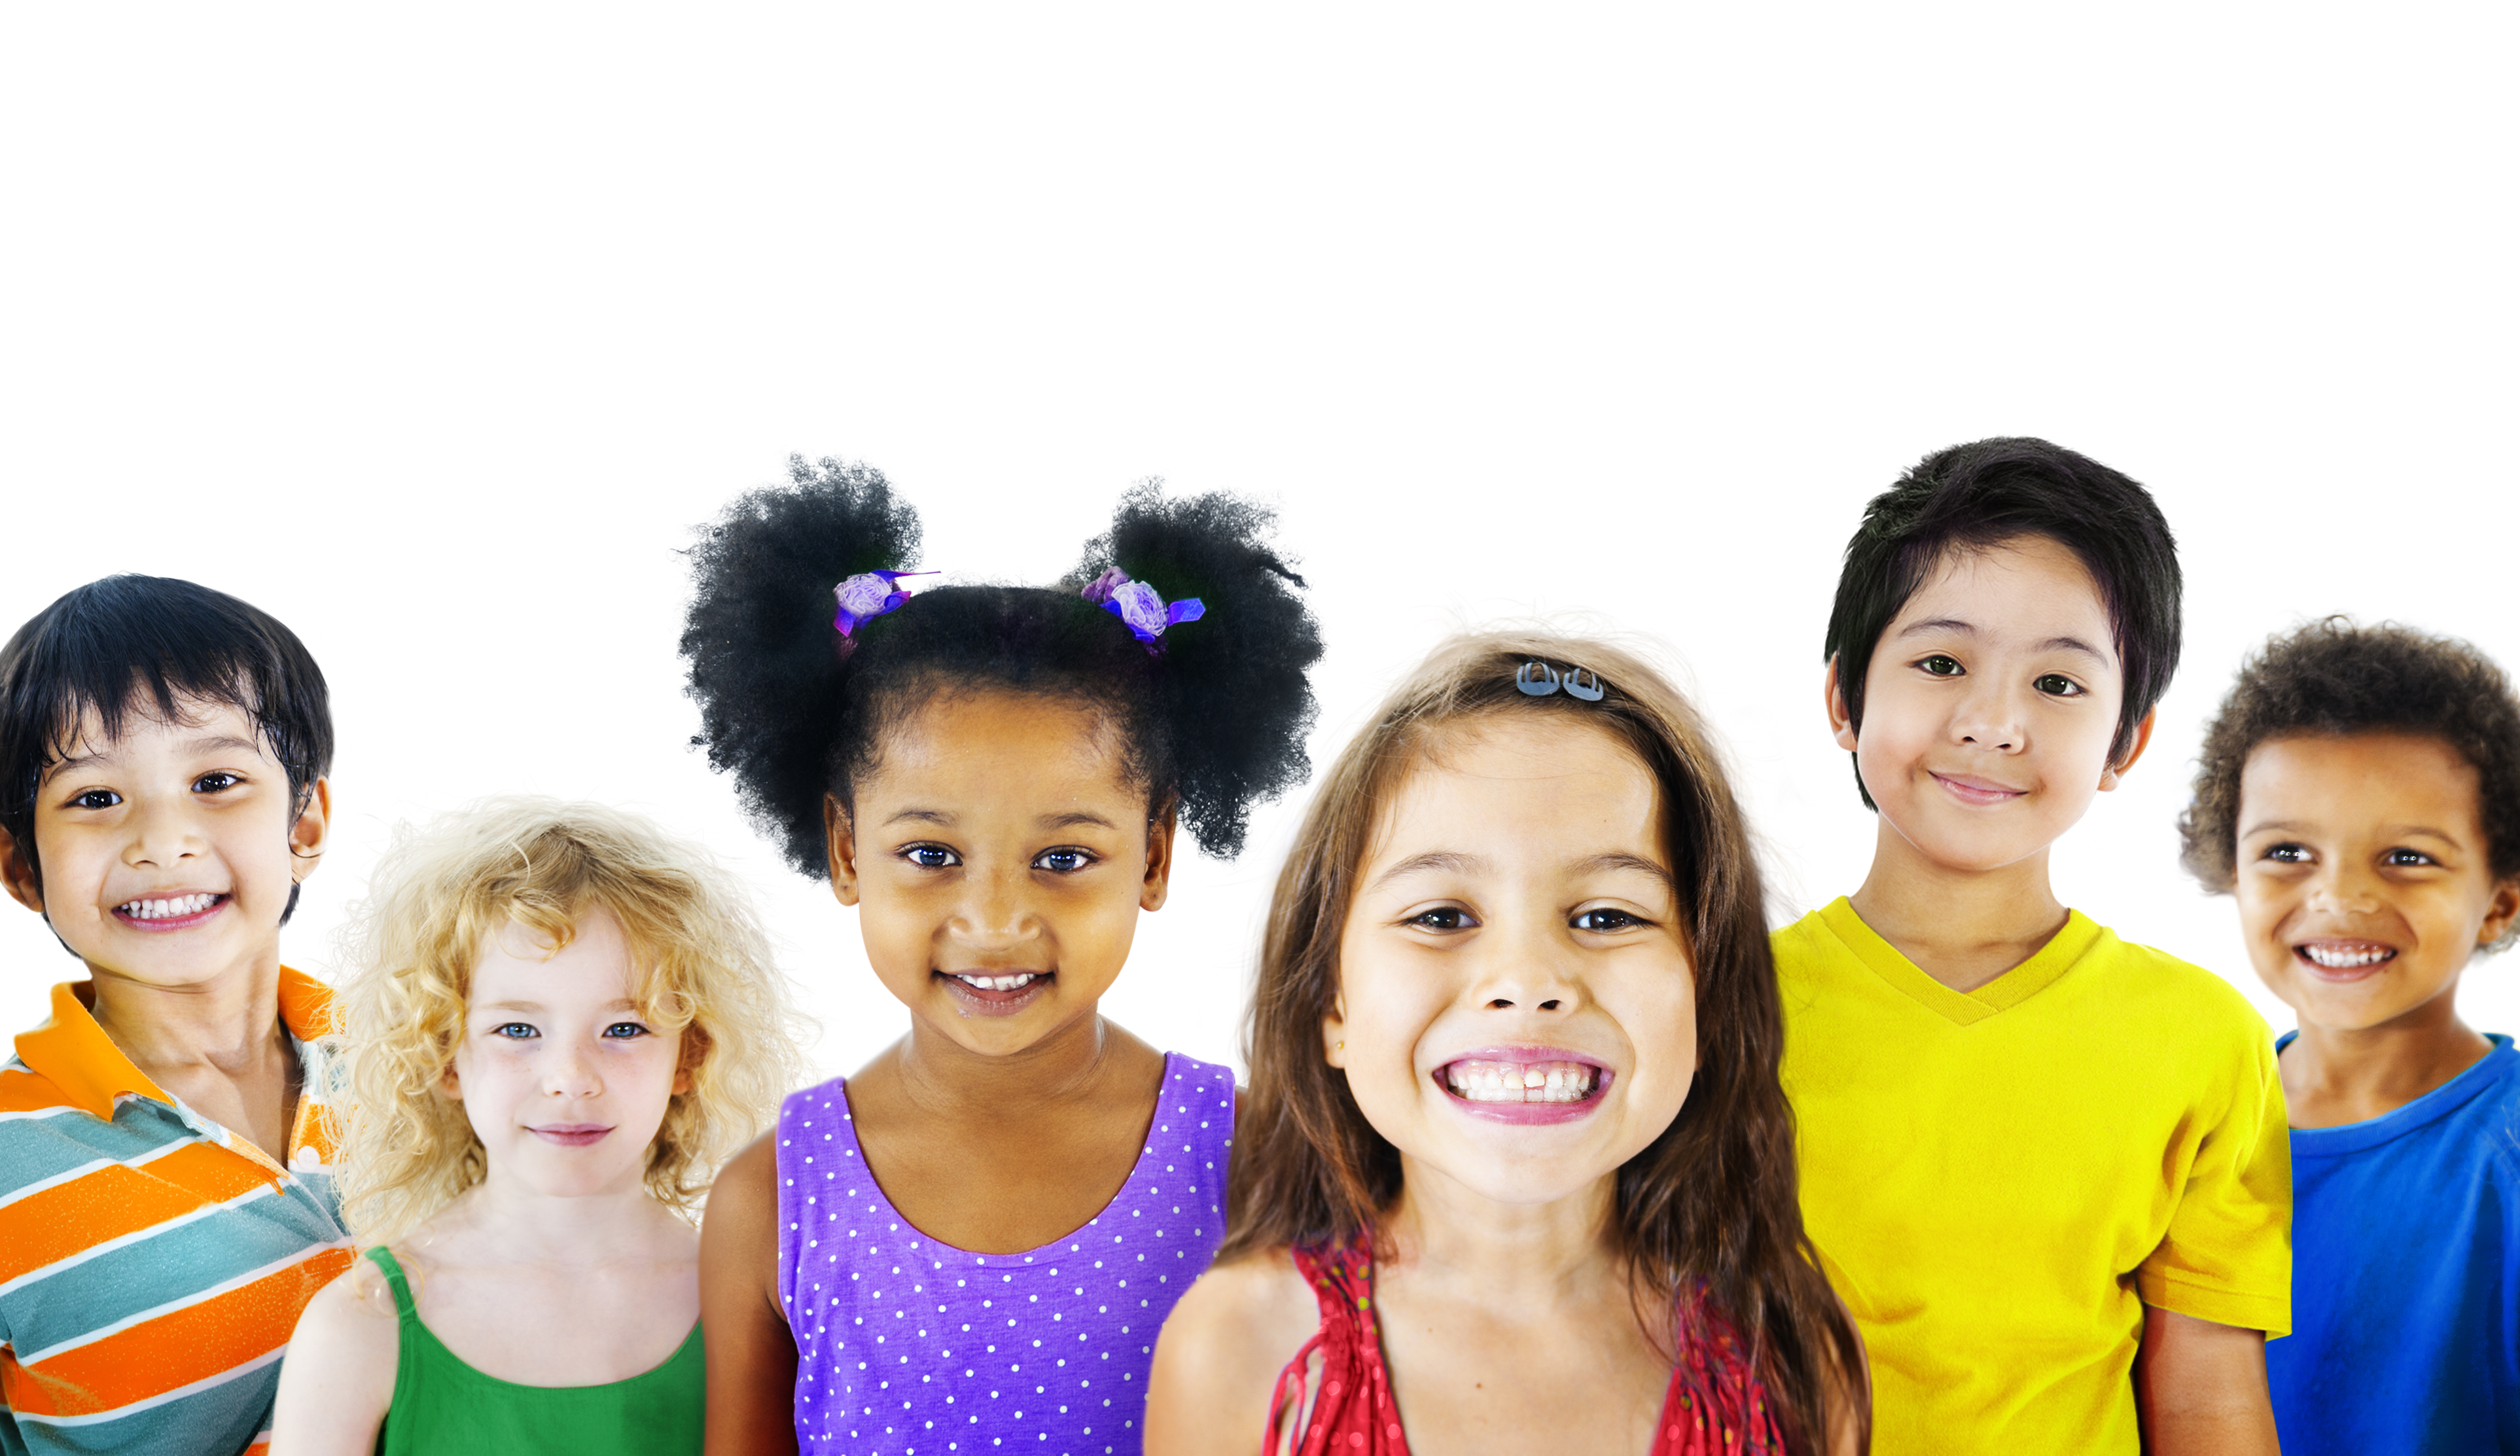 Smiling faces of diverse kids